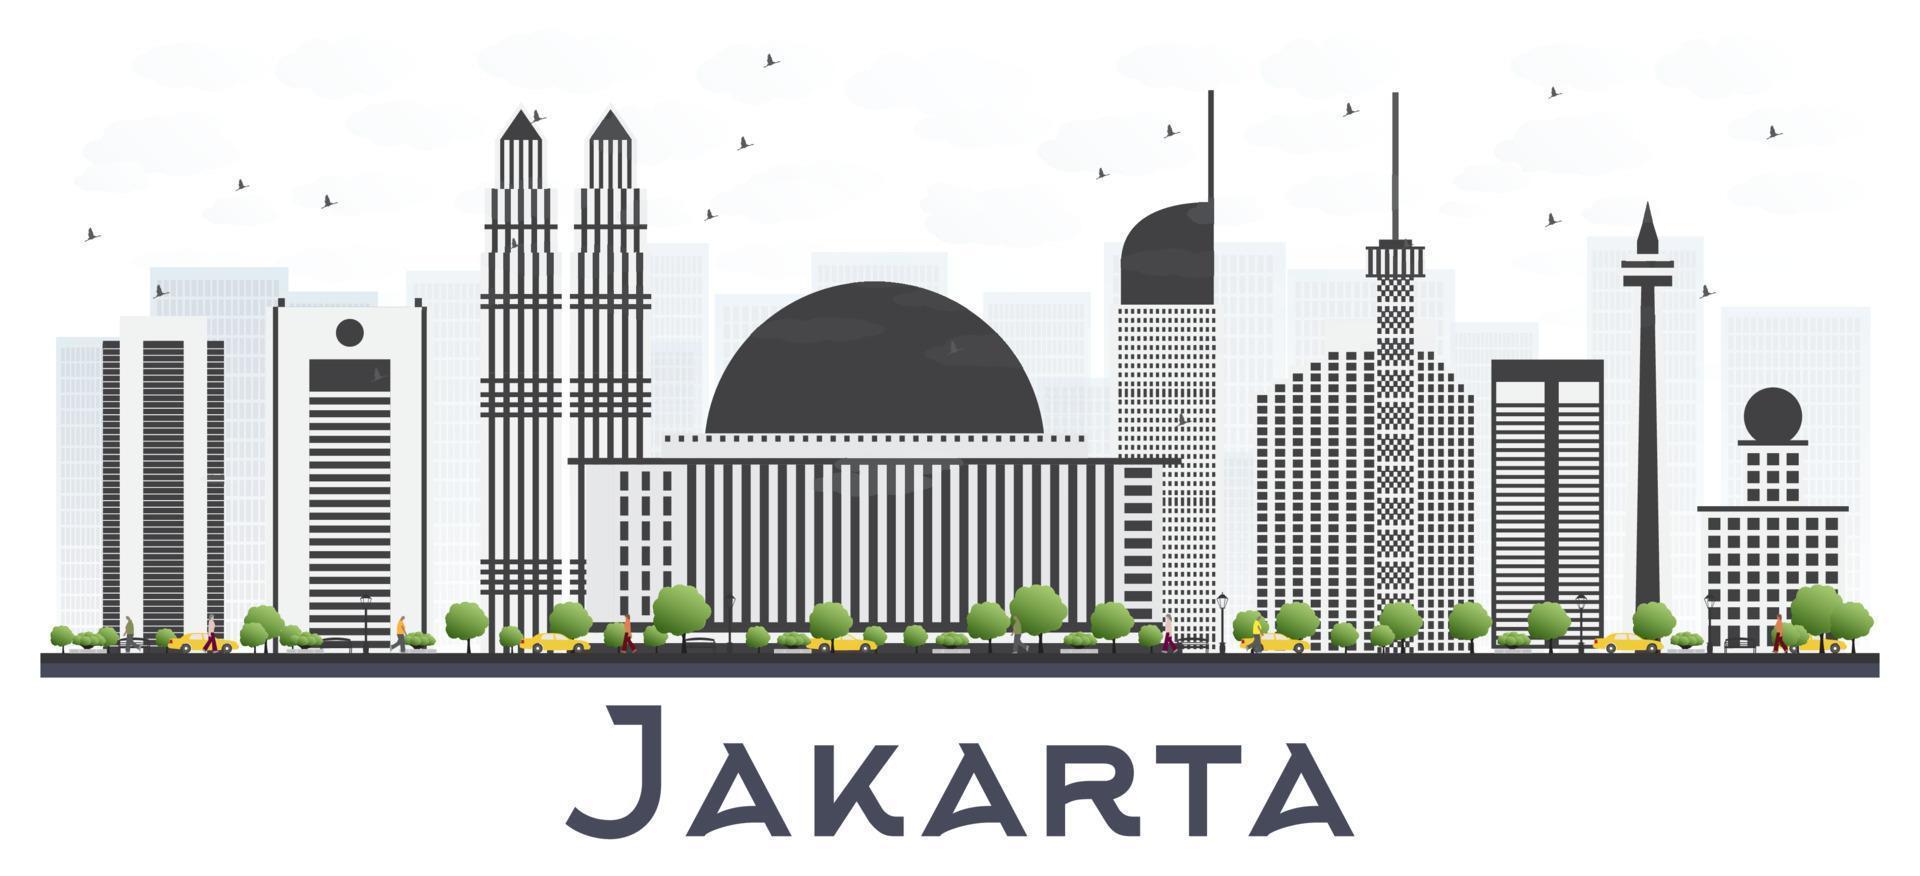 Jakarta Indonesia City Skyline with Gray Buildings Isolated on White Background. vector